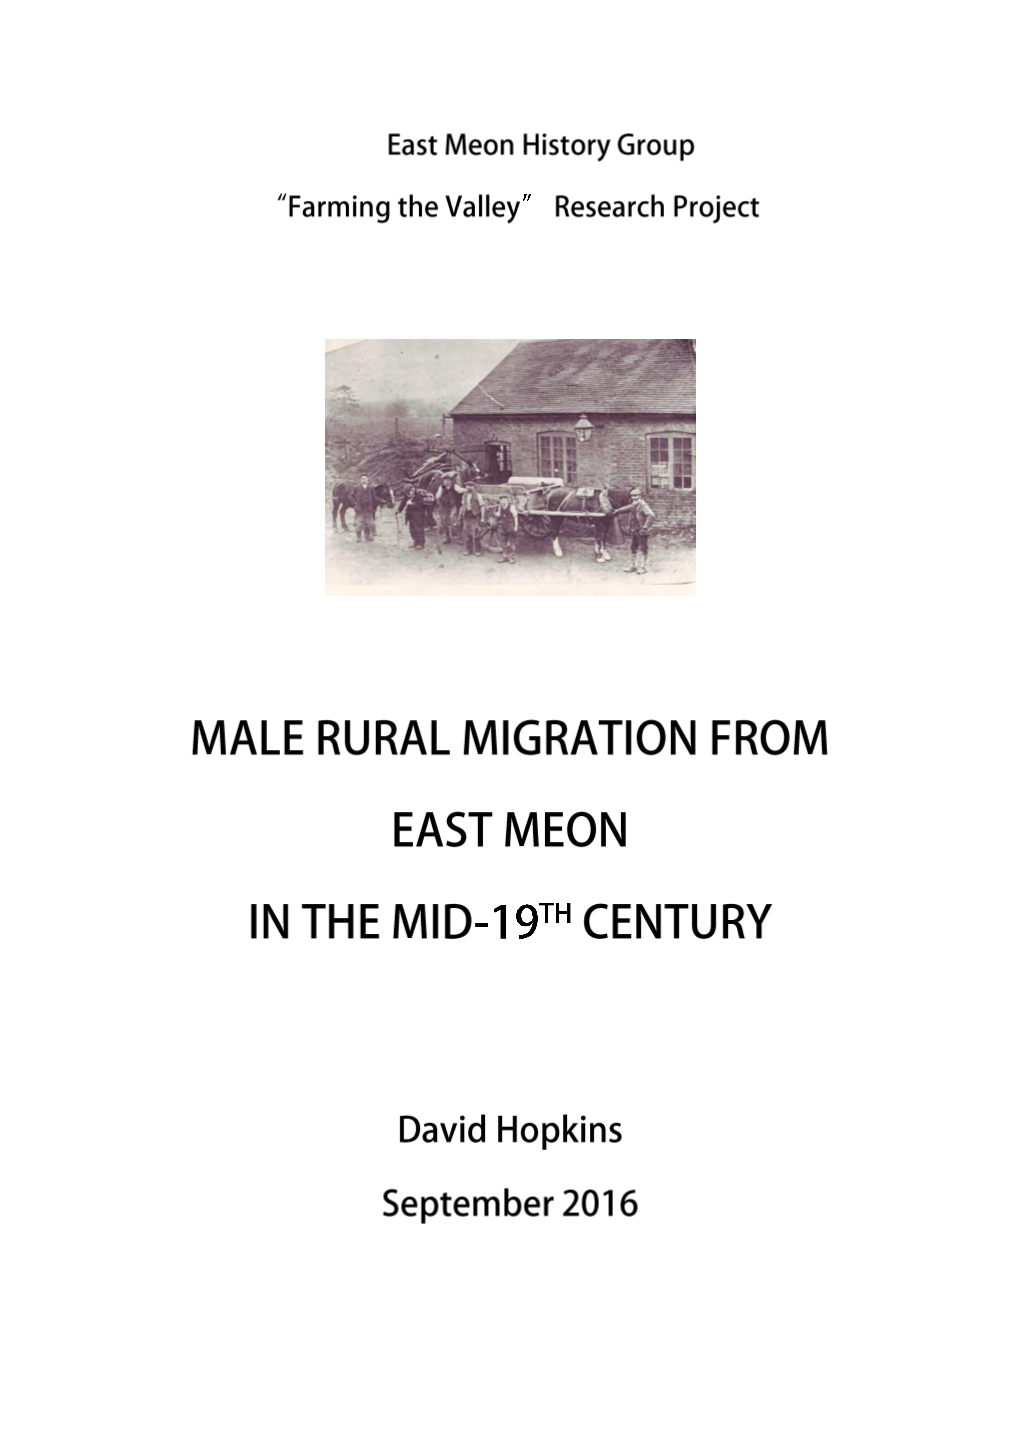 Male Rural Migration from East Meon in the Mid-19Th Century” David Hopkins, 2016